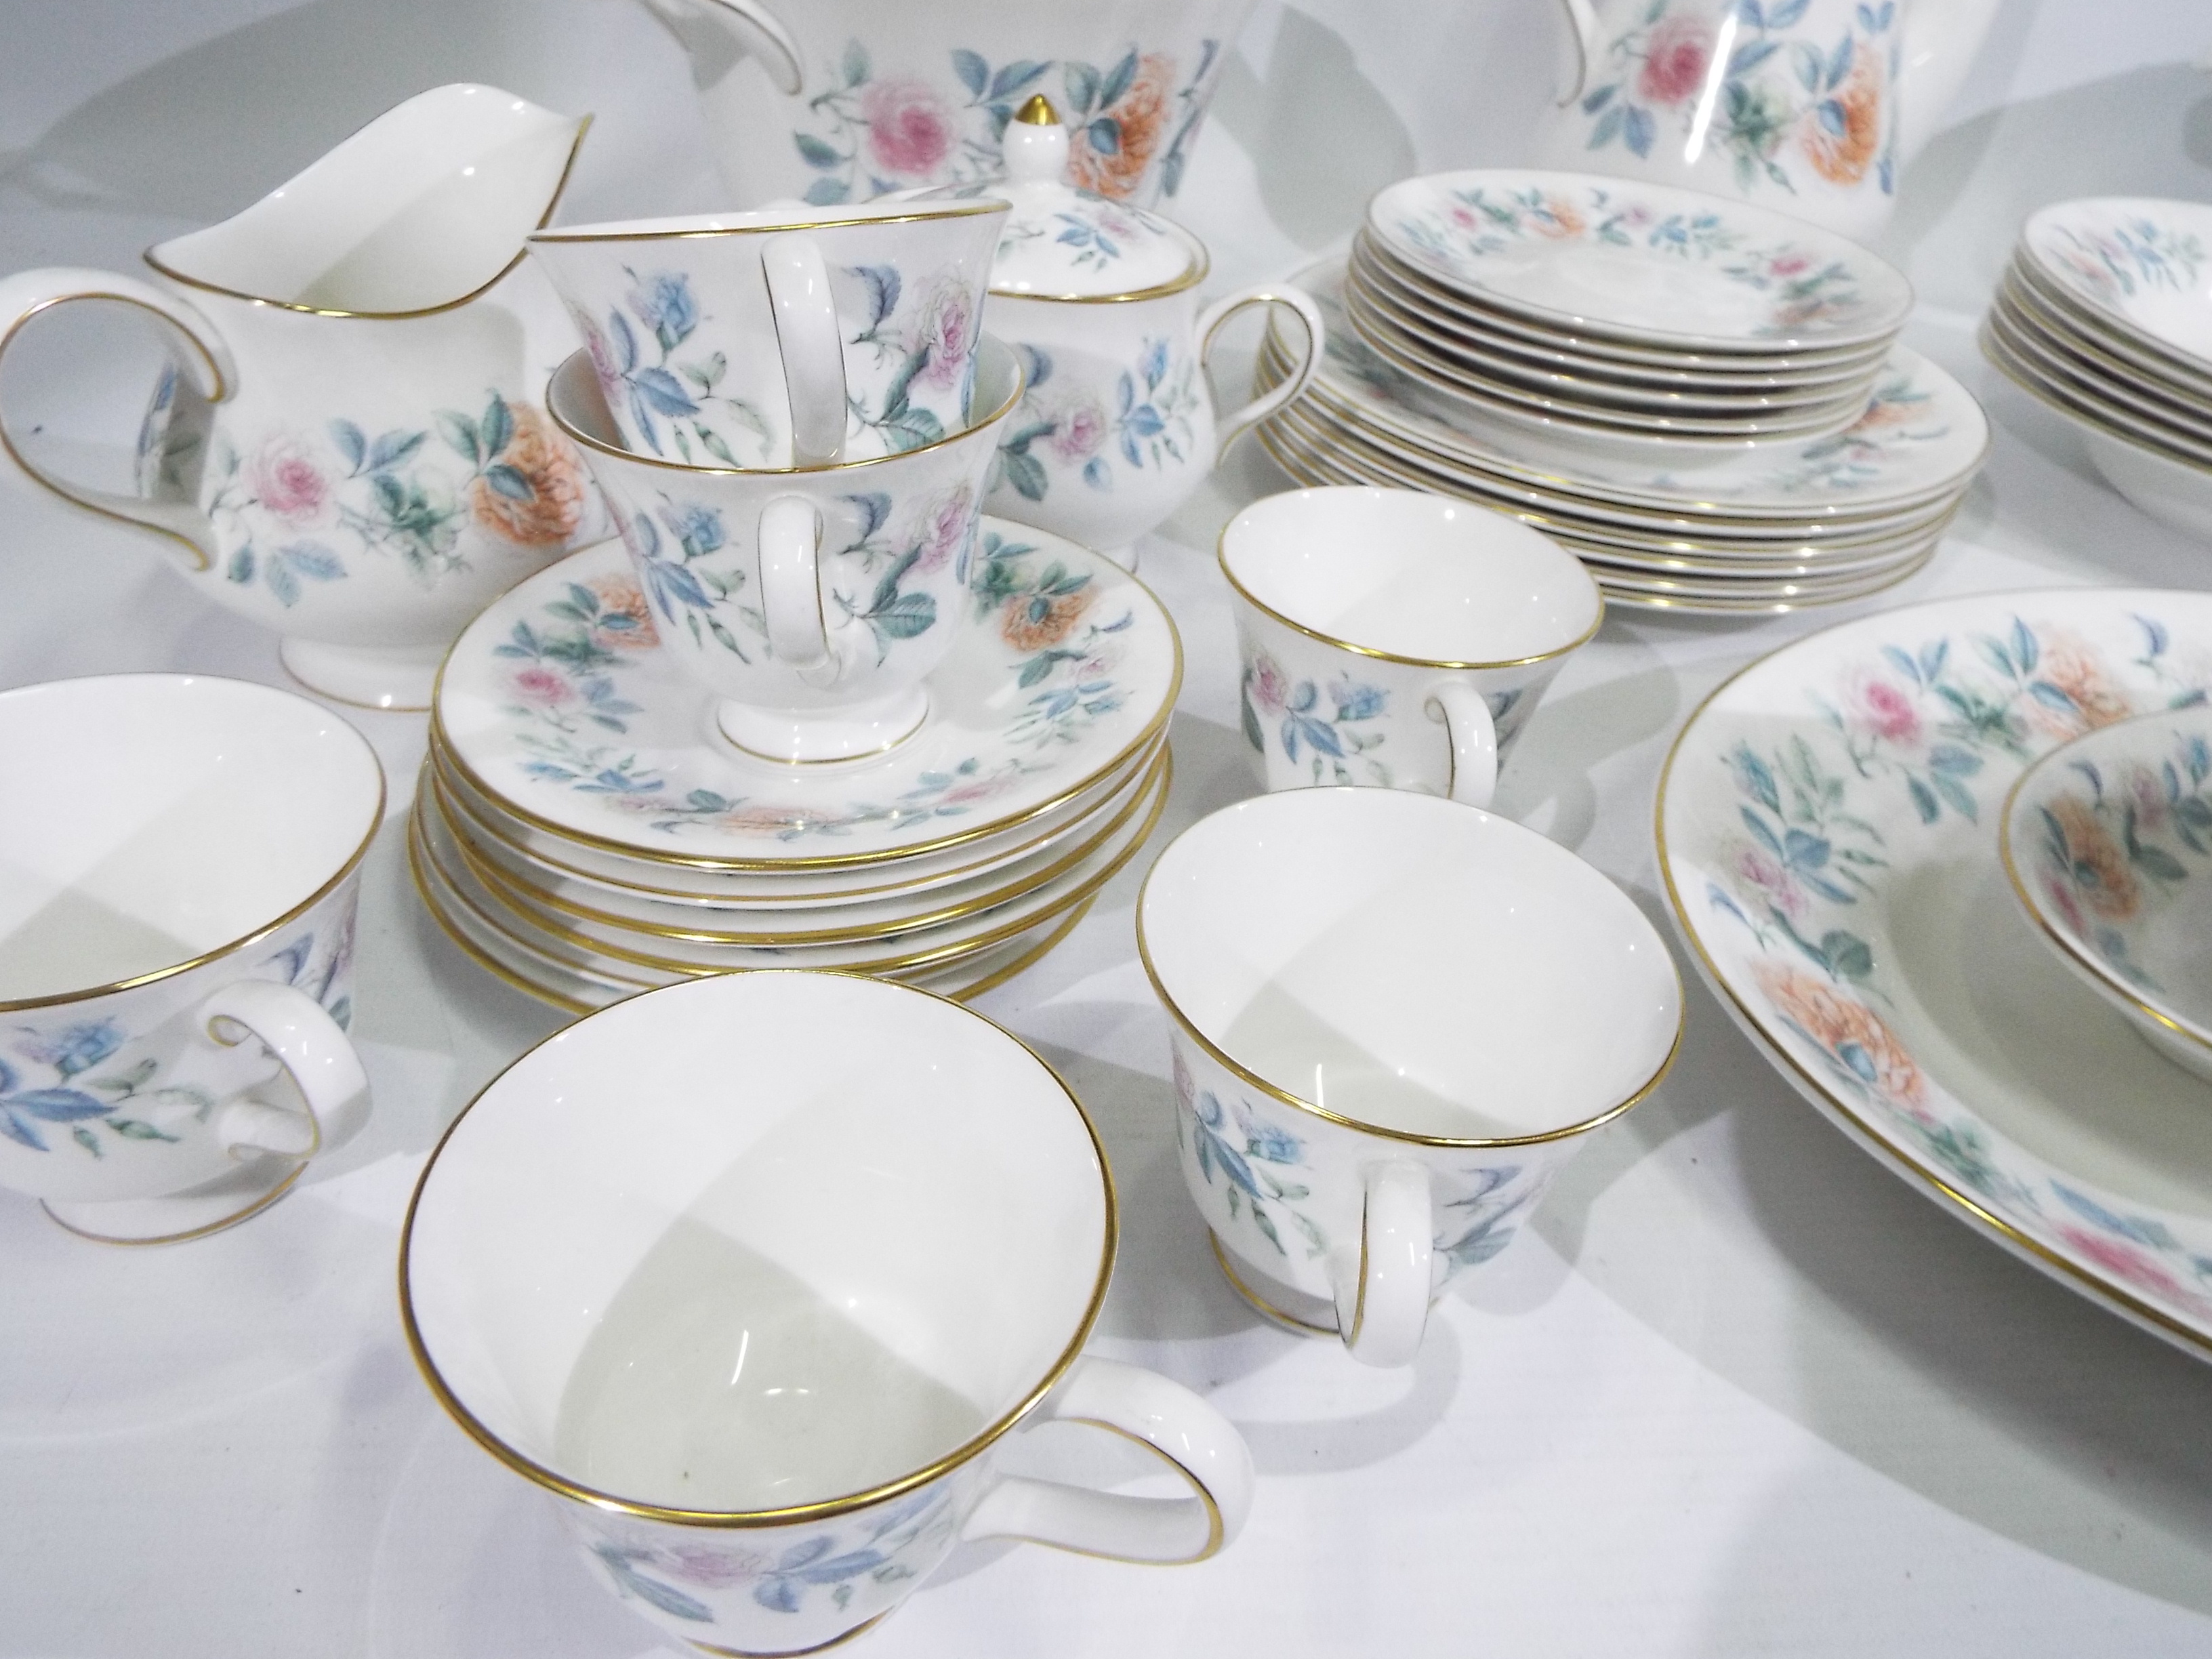 Wedgwood - A collection of dinner and tea wares in the Mist Rose pattern comprising dinner plates, - Image 4 of 5